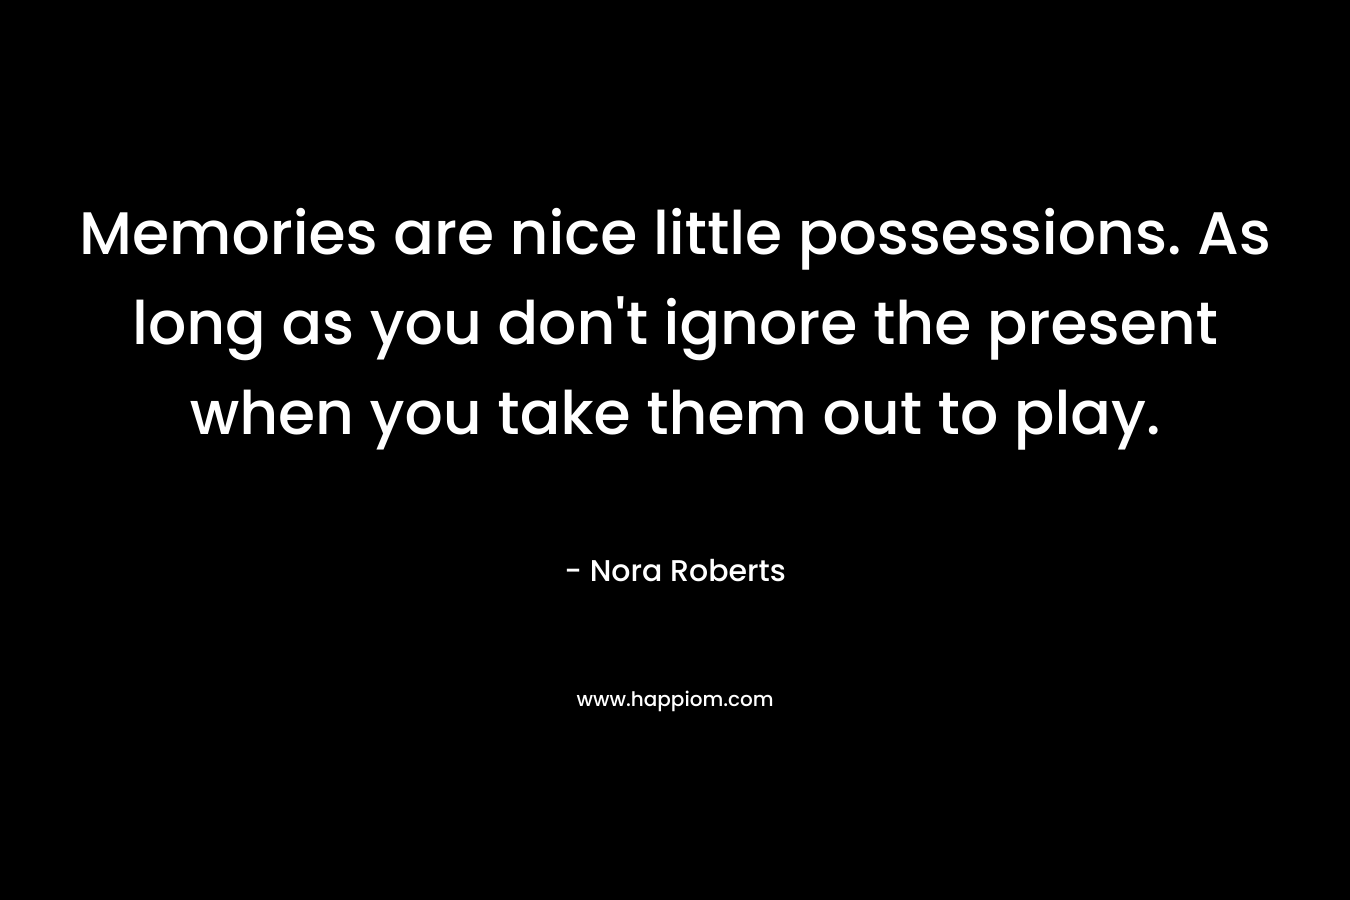 Memories are nice little possessions. As long as you don't ignore the present when you take them out to play.